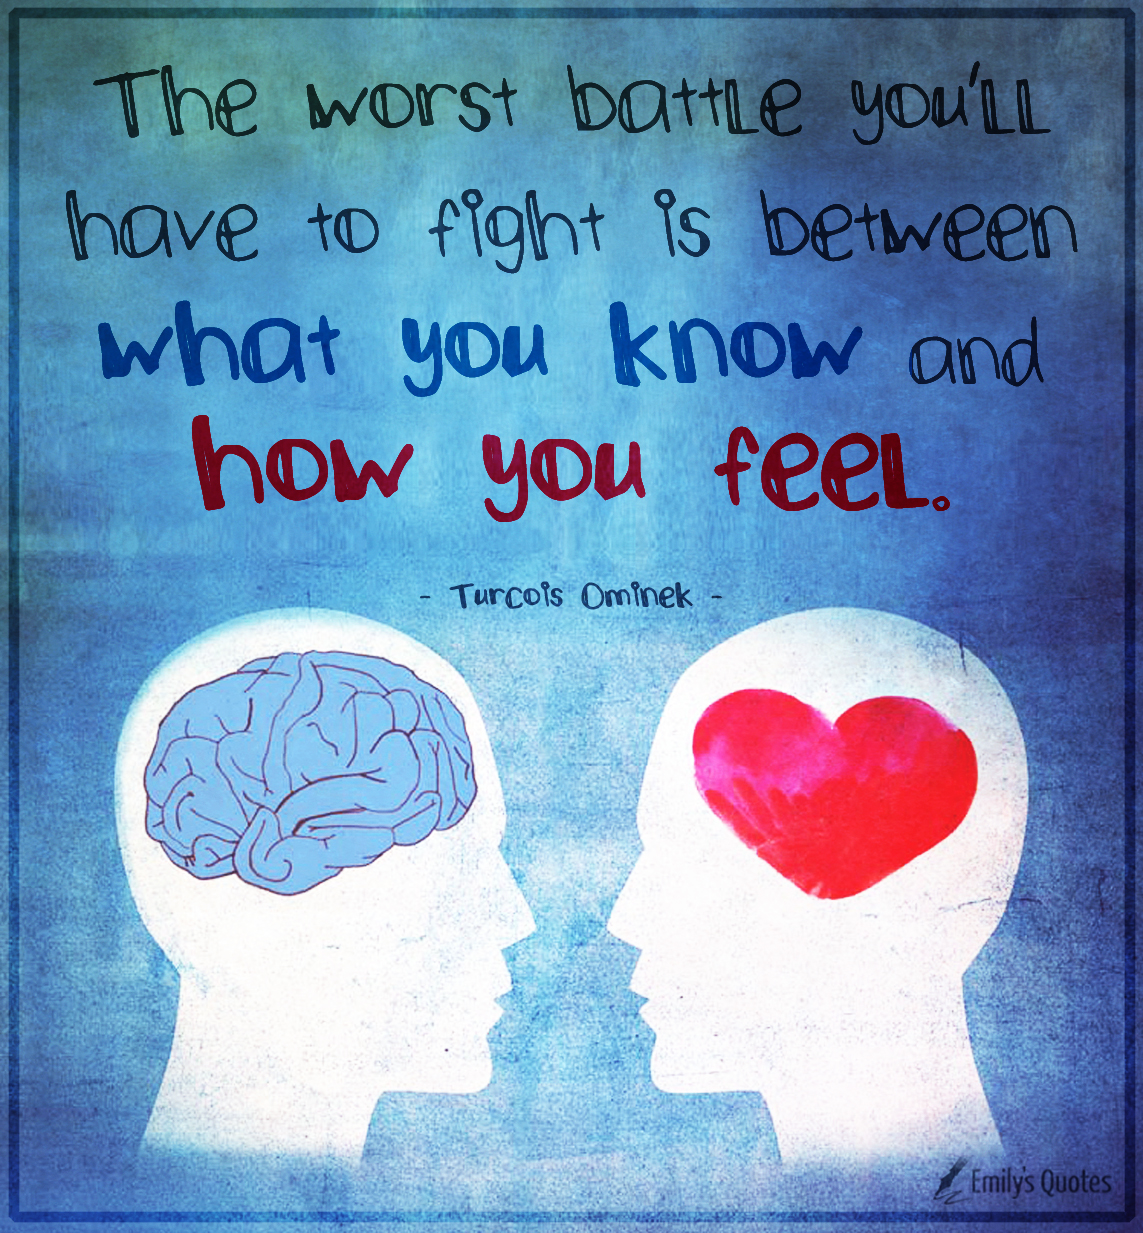 The worst battle you’ll have to fight is between what you know and how you feel